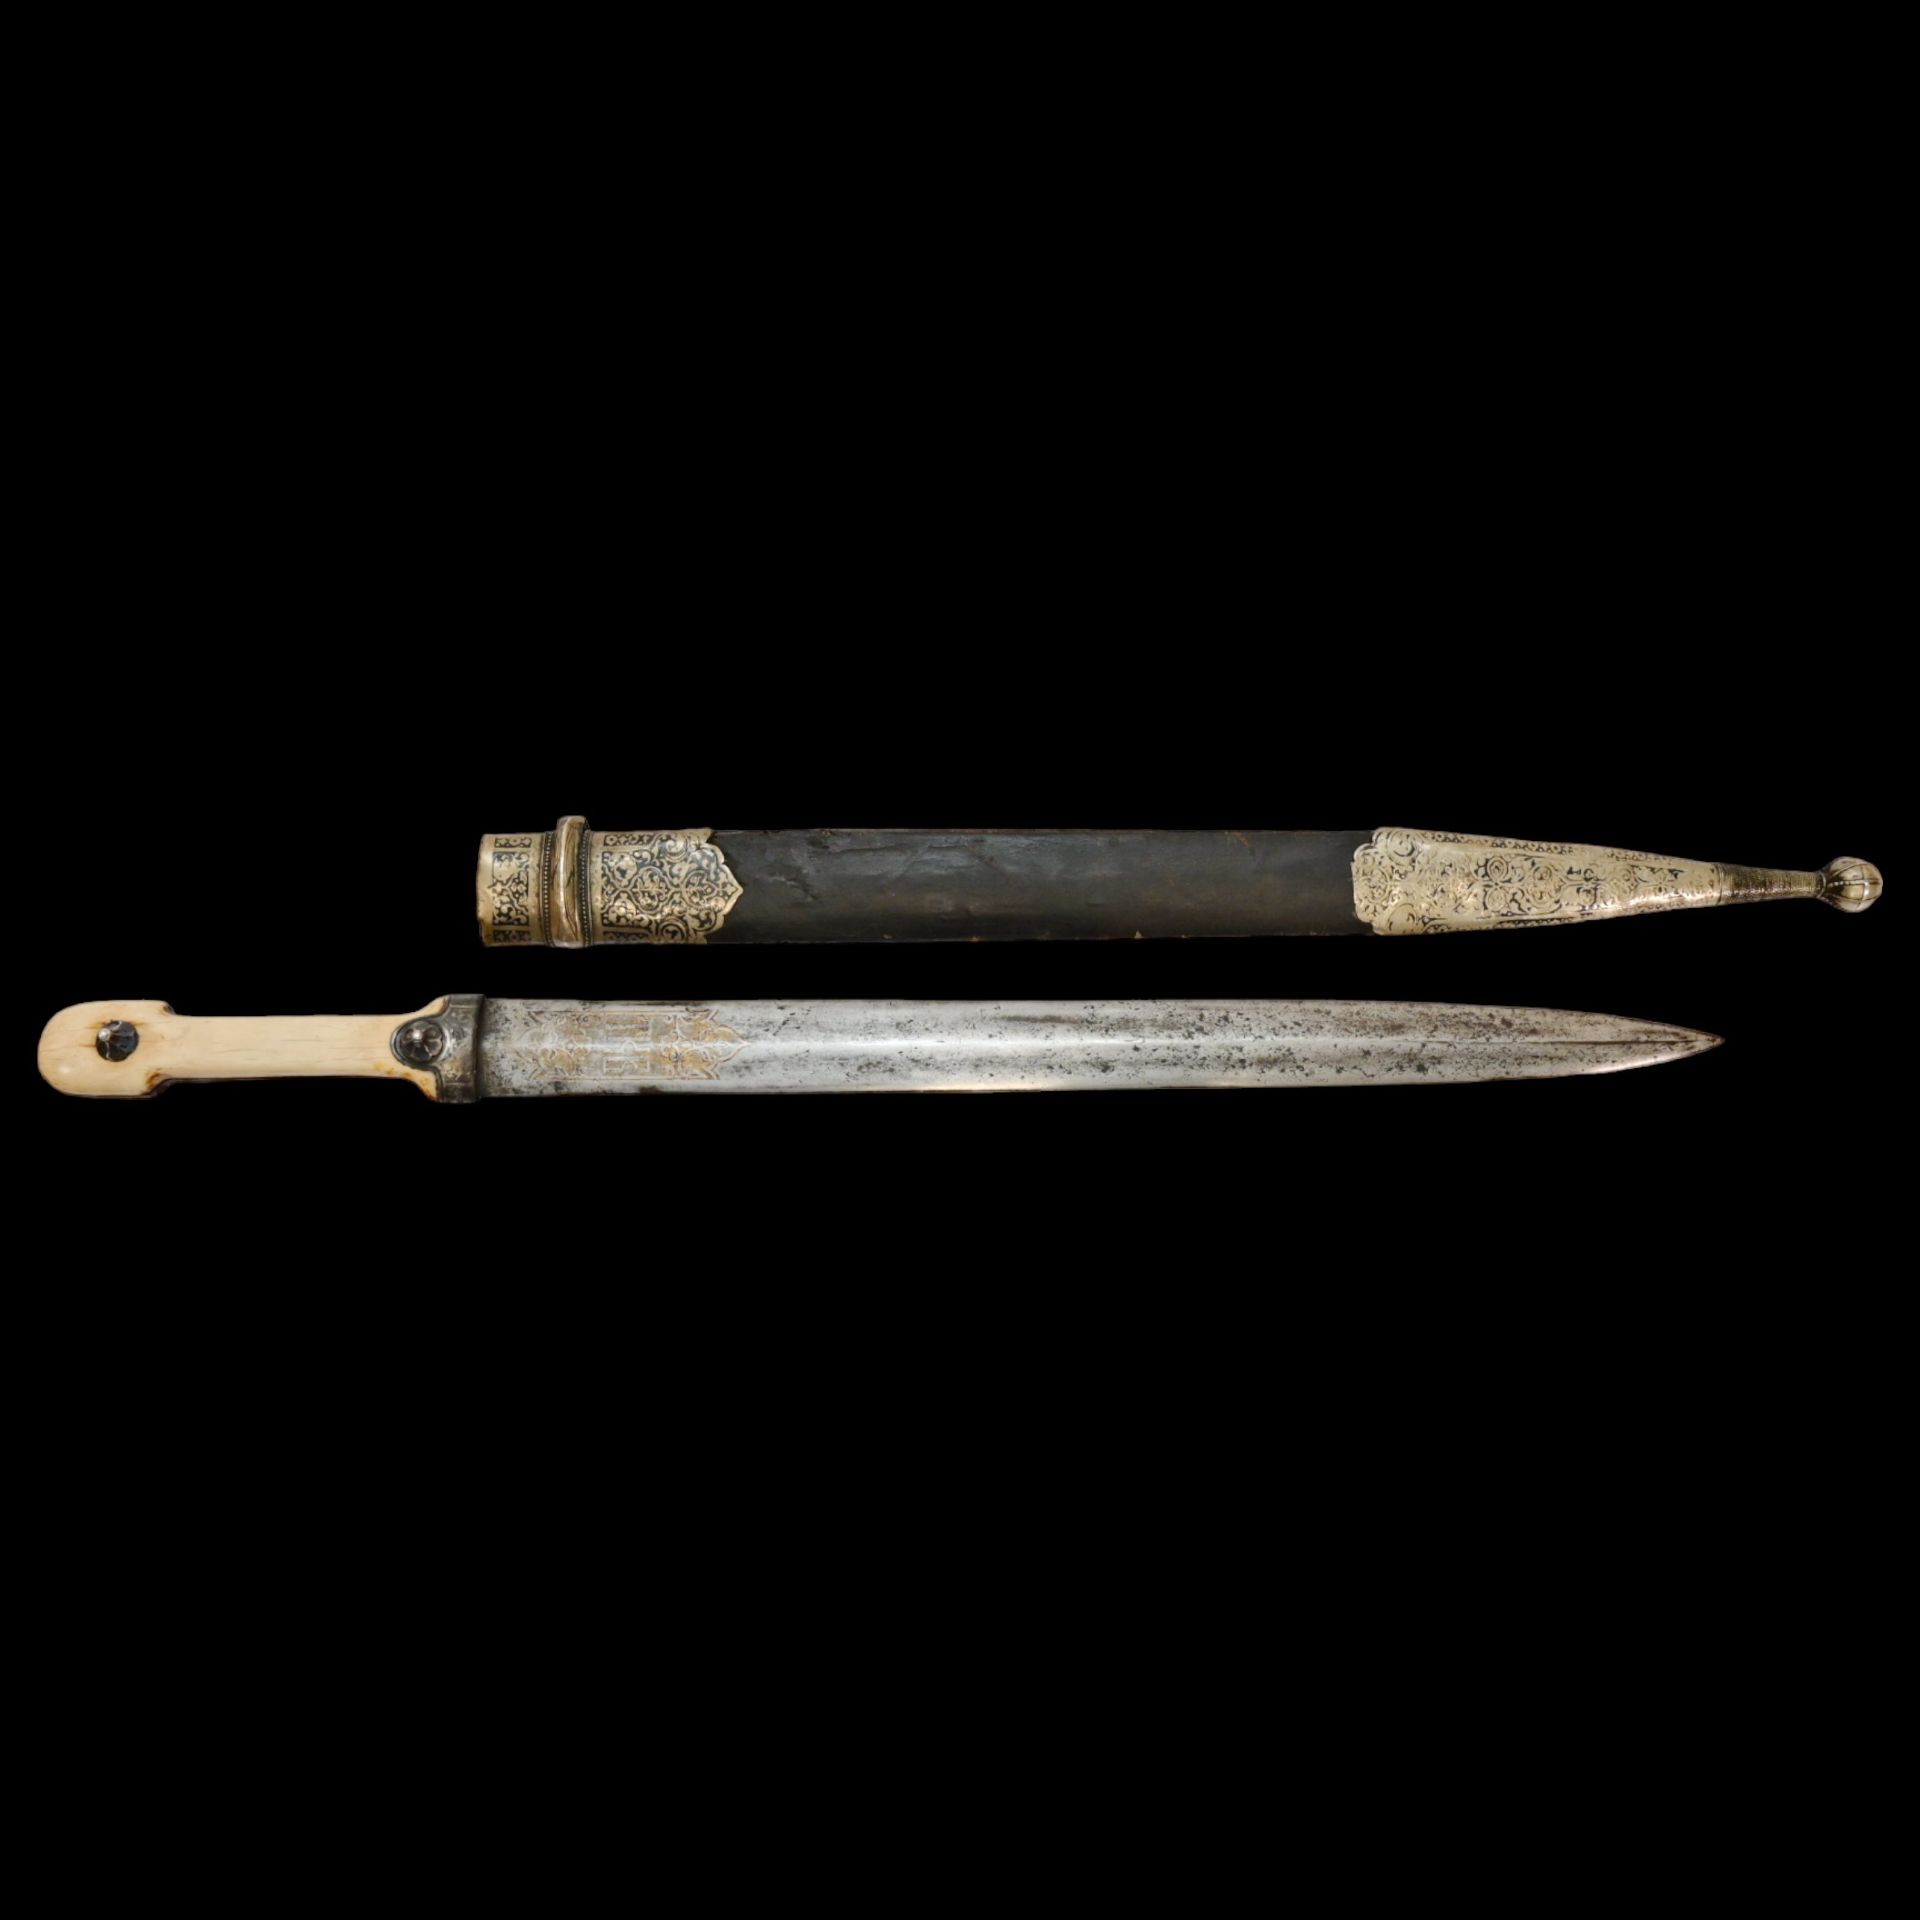 Rare Dagger of Kama, Cossack of the Terek Cossack Army, Silver and Niello, Russian Empire, 1916. - Image 2 of 8